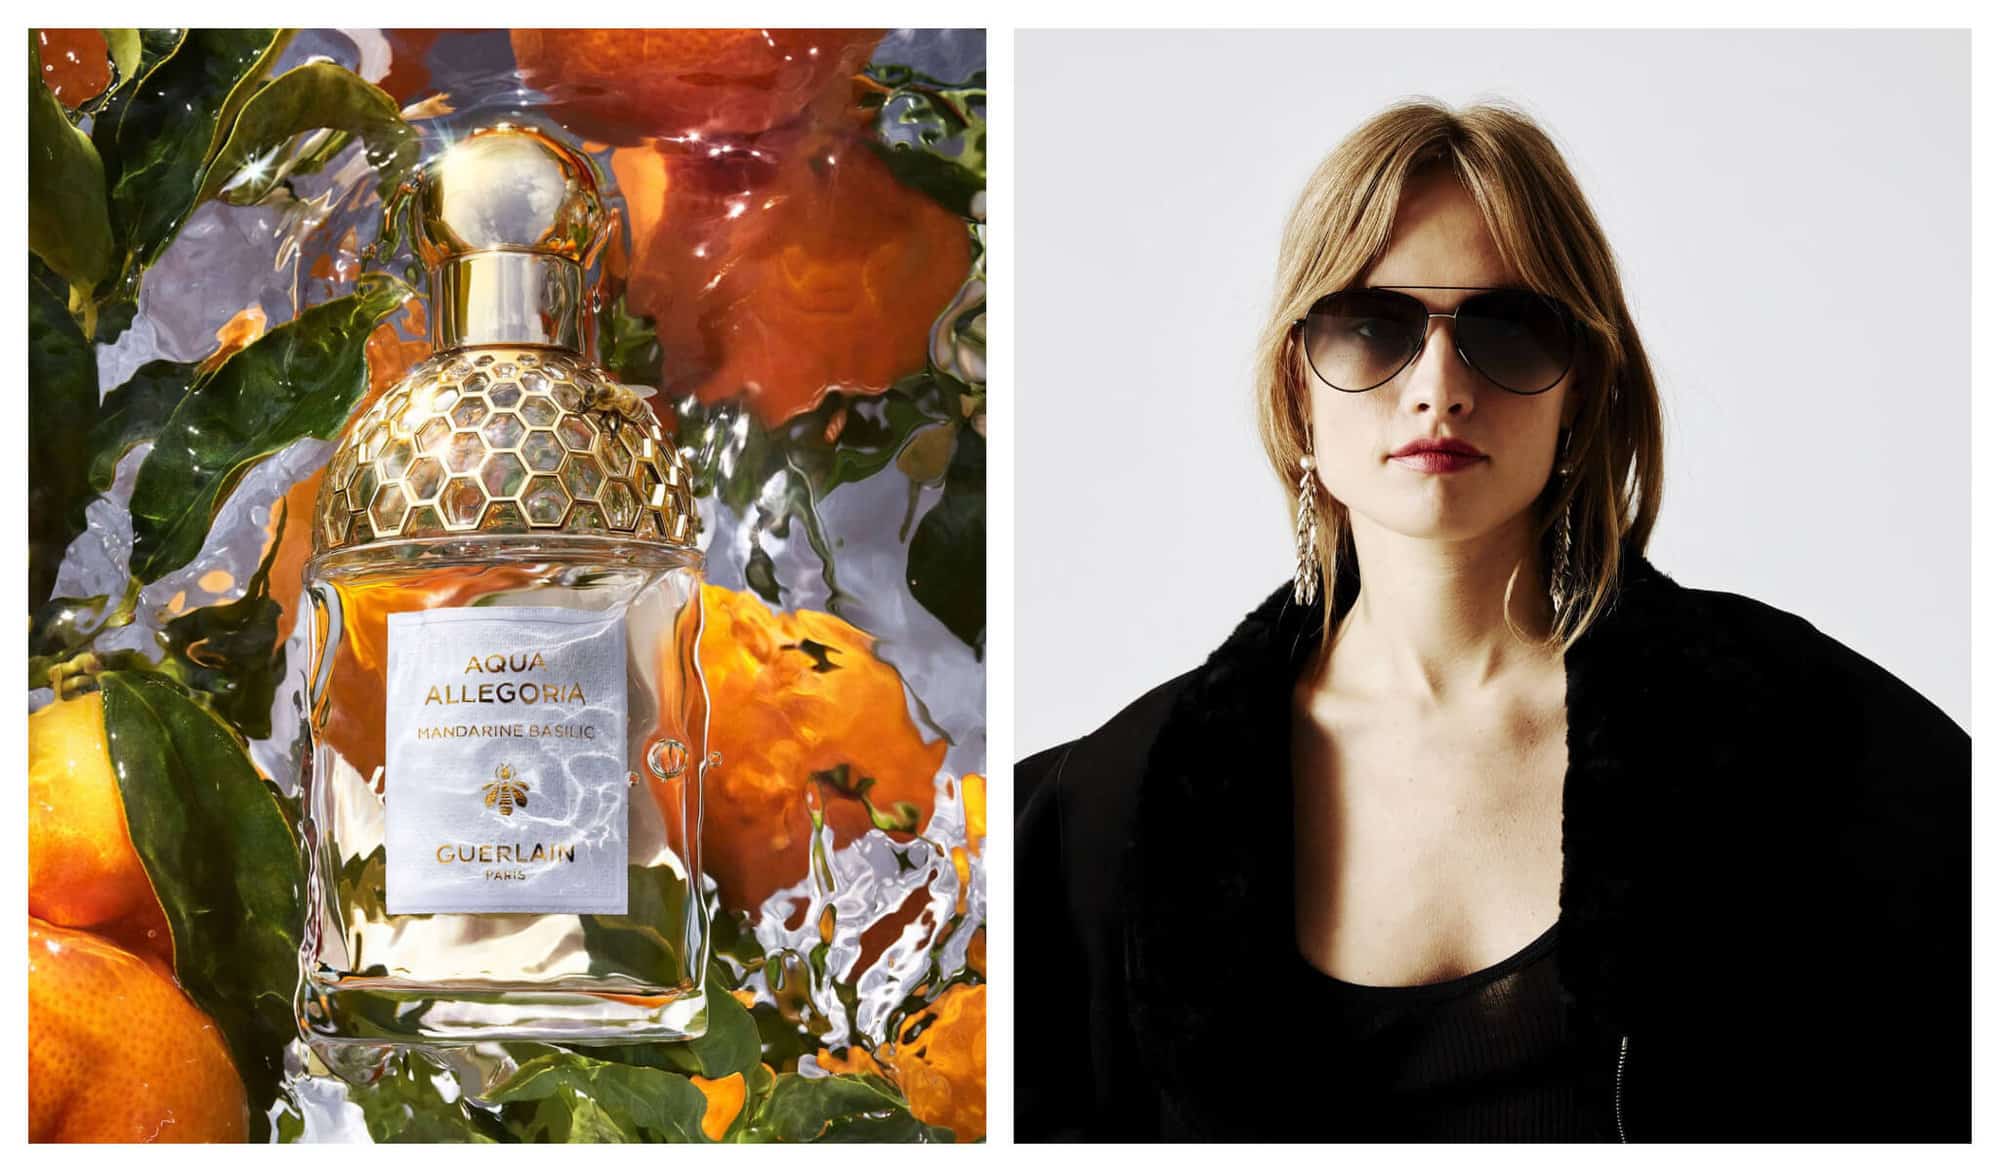 Left: A golden bottle of perfume in a water full of orange fruits and green leaves. Right: A blond-haired woman in black outfit wears black sunglasses.